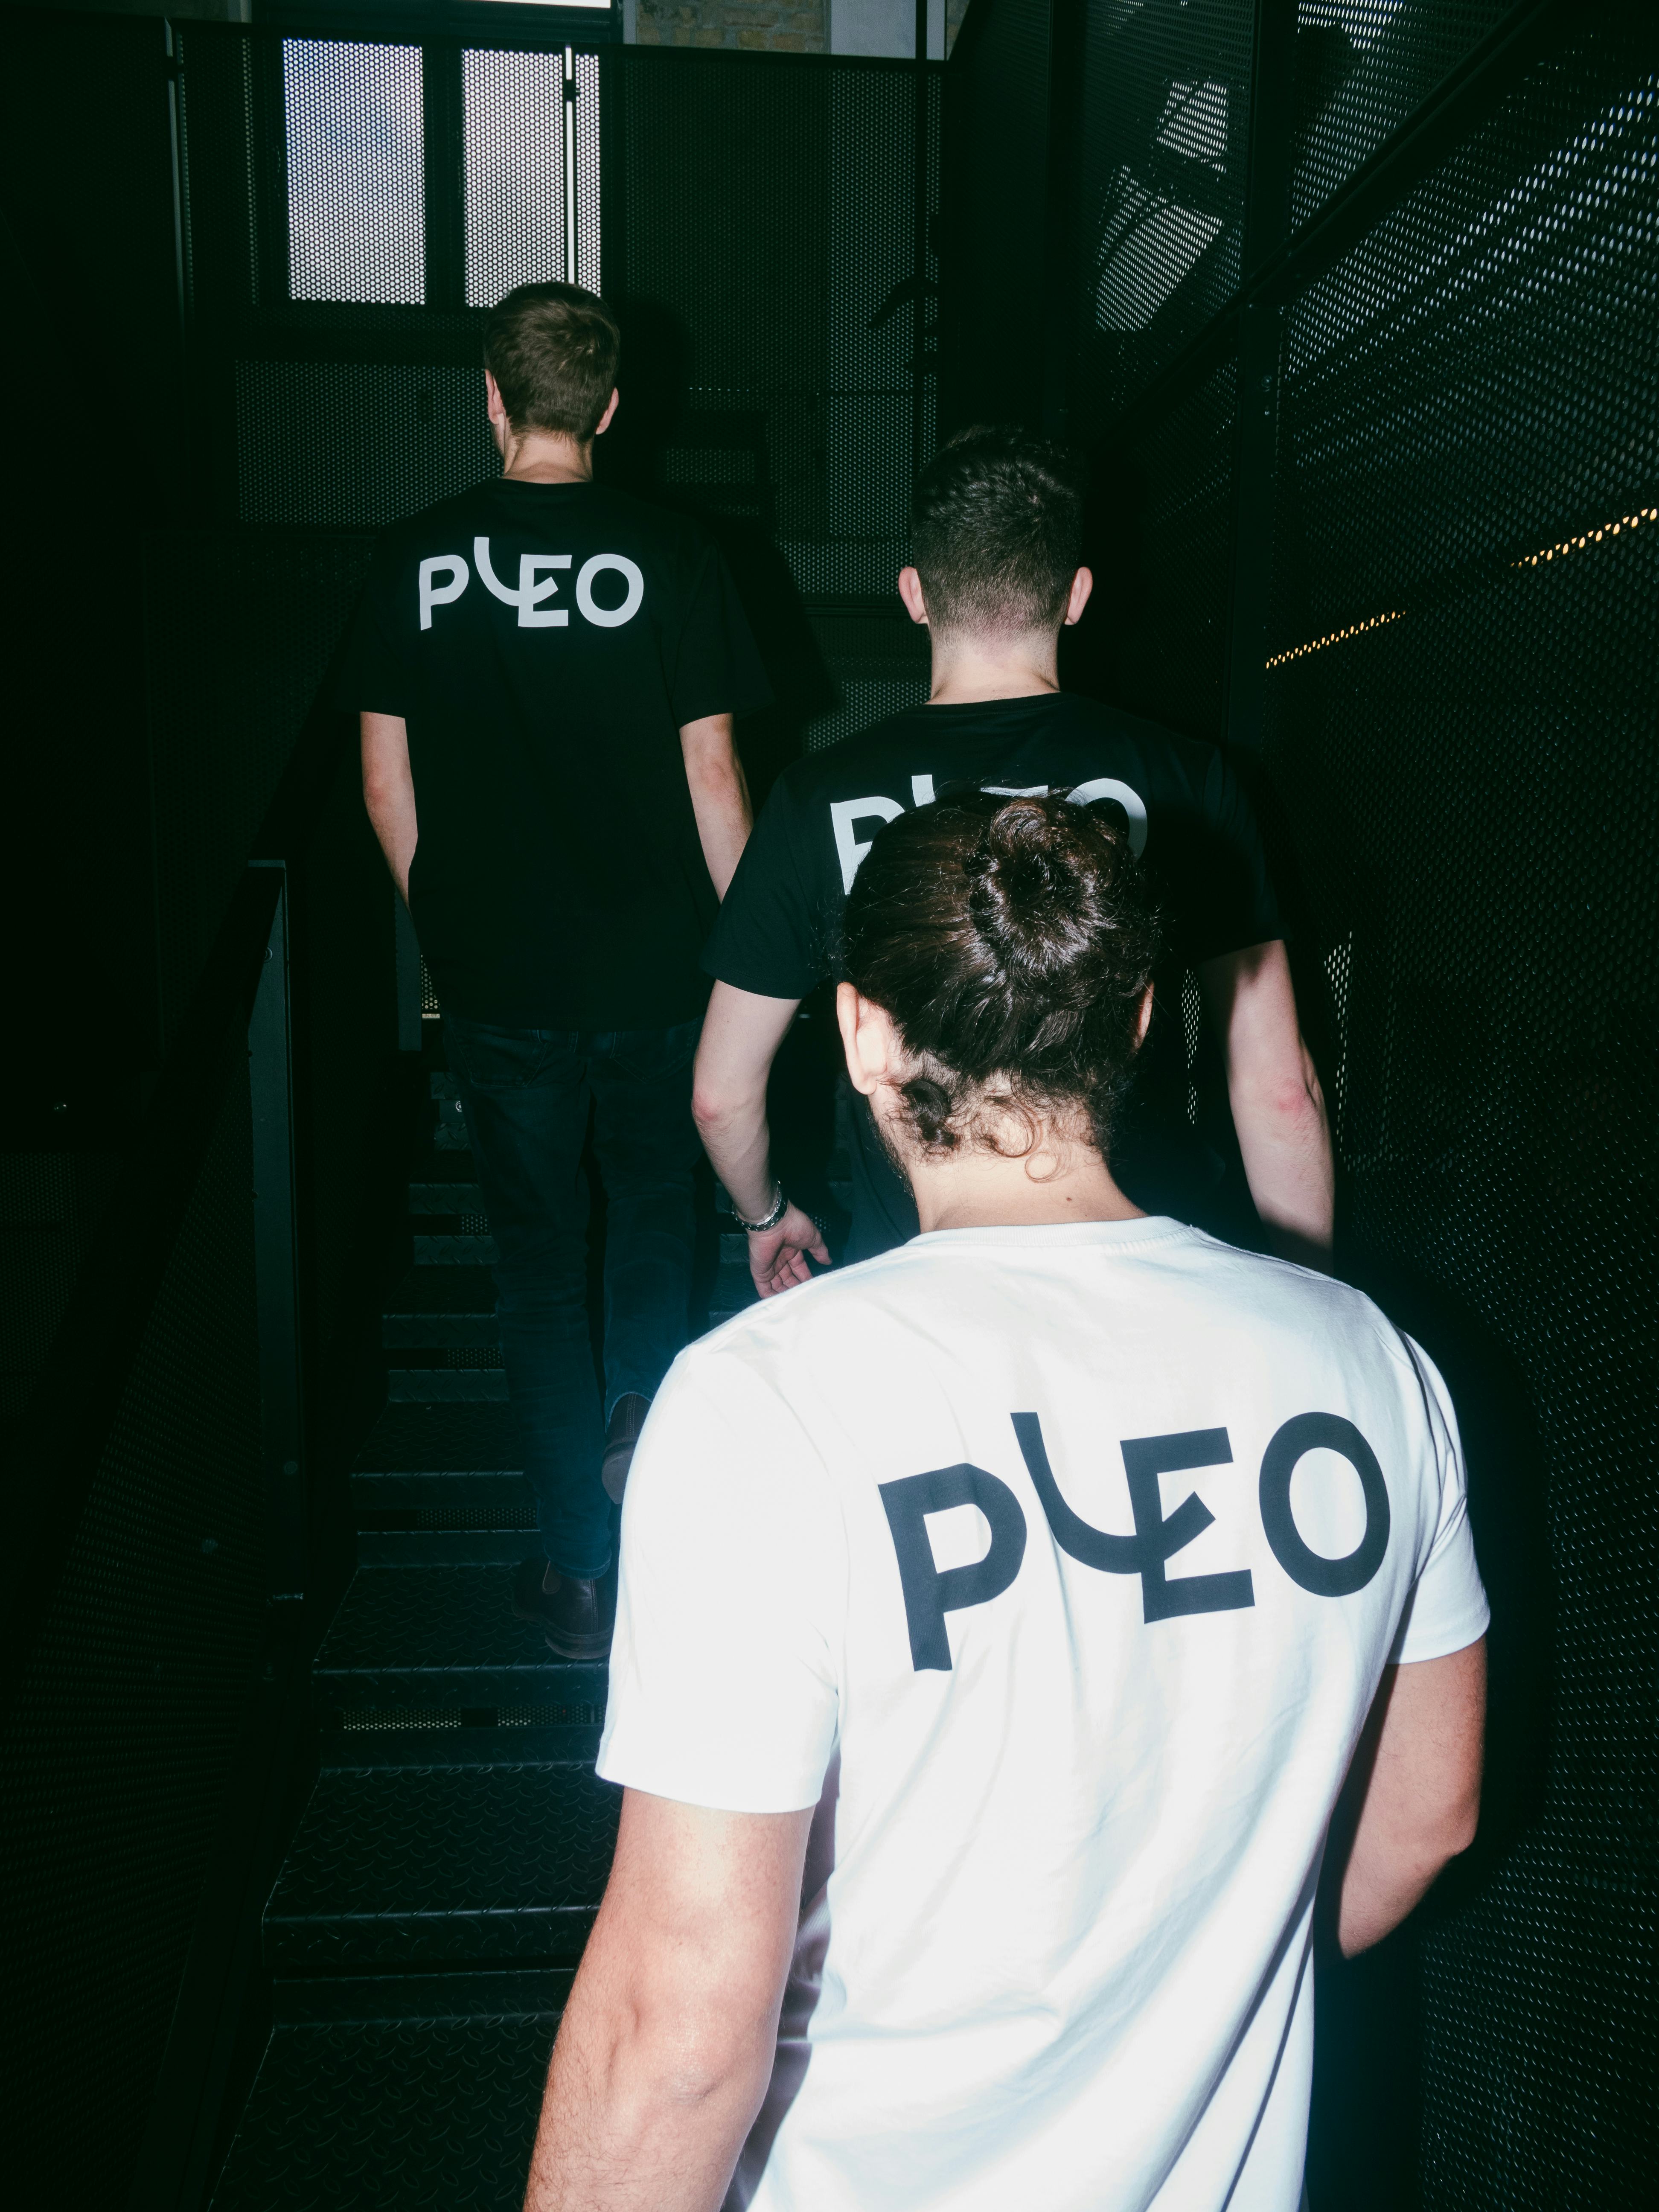 A photograph of three Pleo employees walking up the stairs wearing T shirts with the Pleo logo on the back